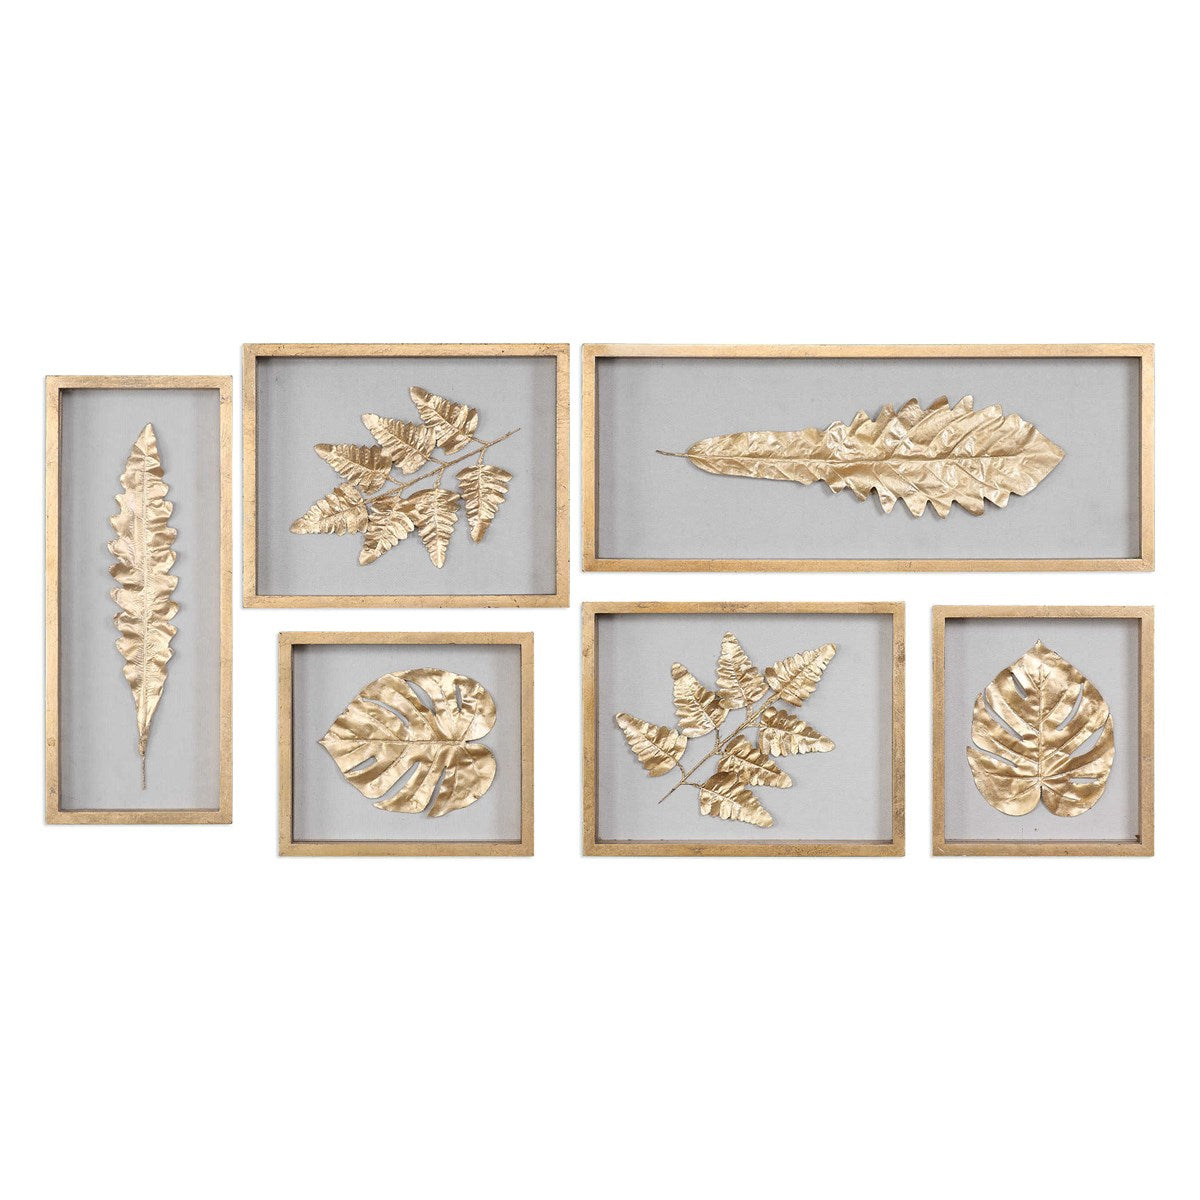 Golden Leaves Shadow Box, S/6